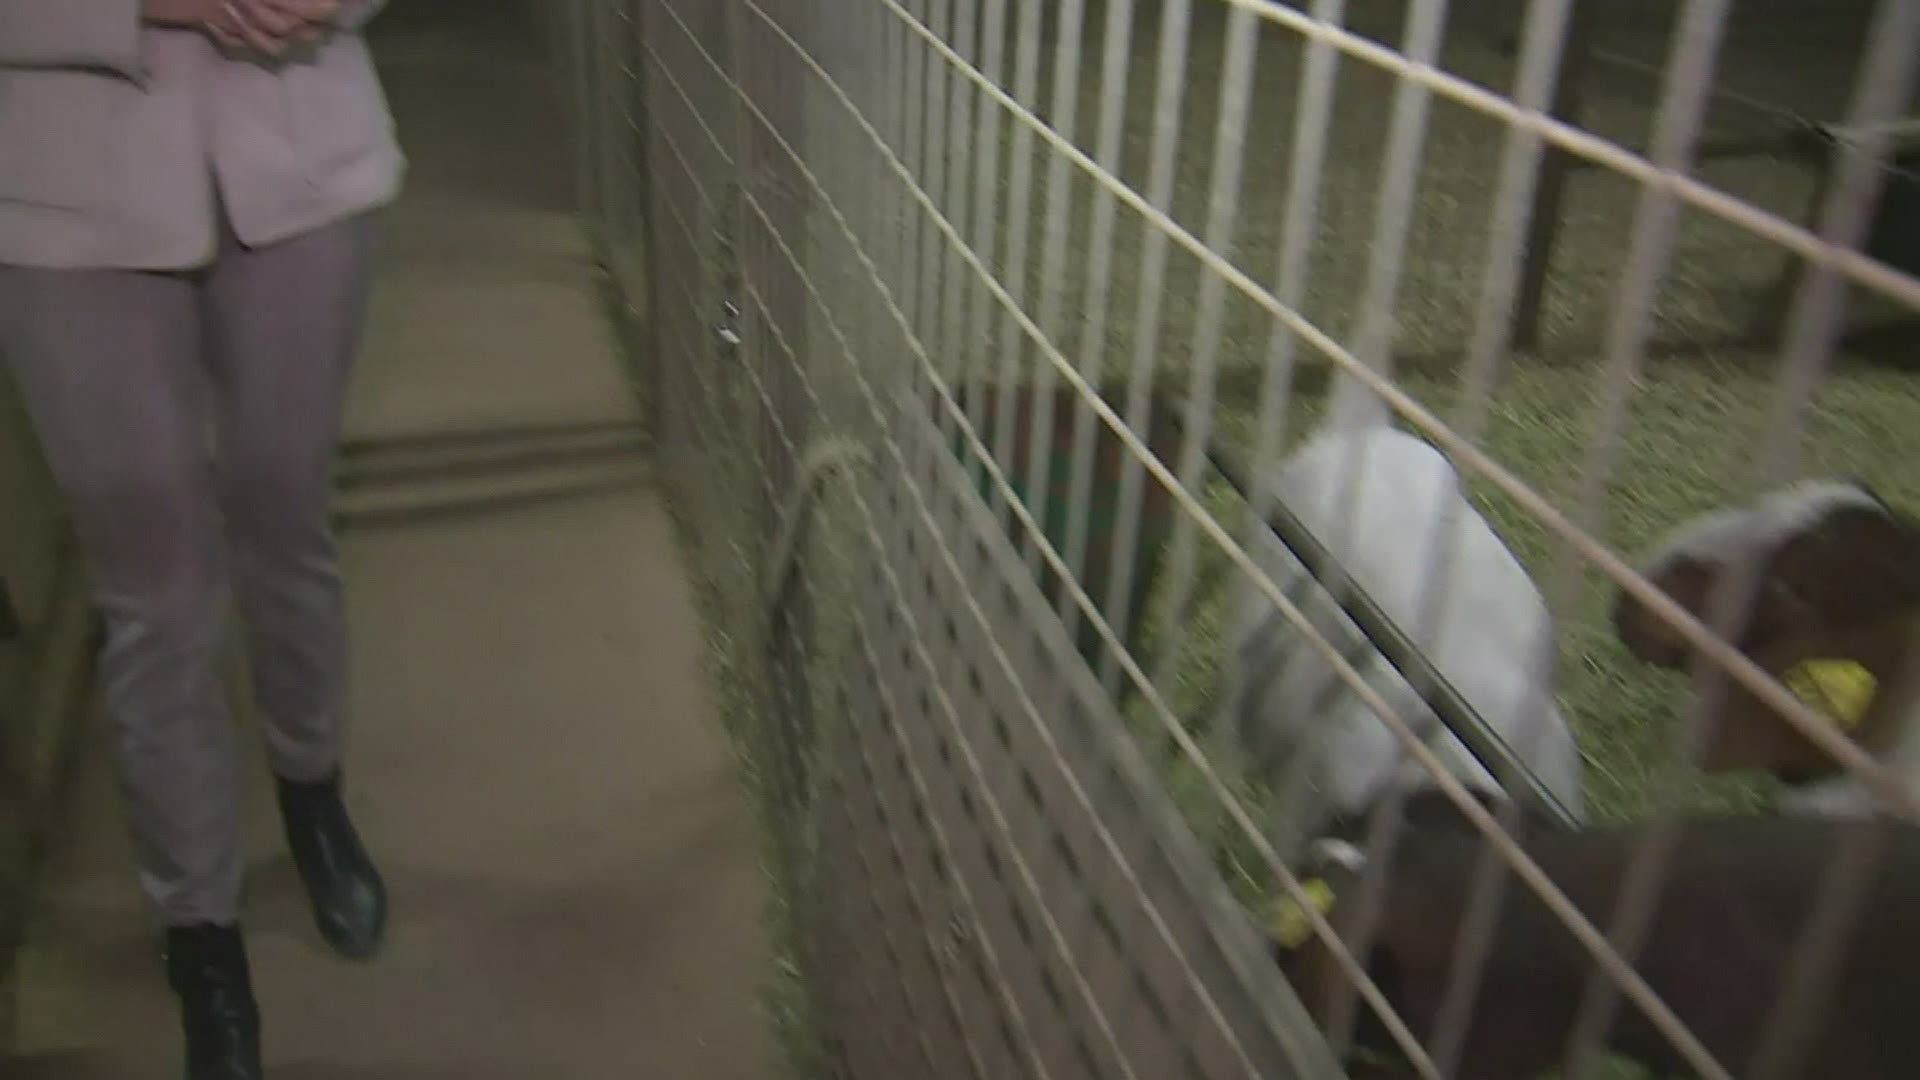 A goat is back at a California high school after being stolen by an animal rights activist.